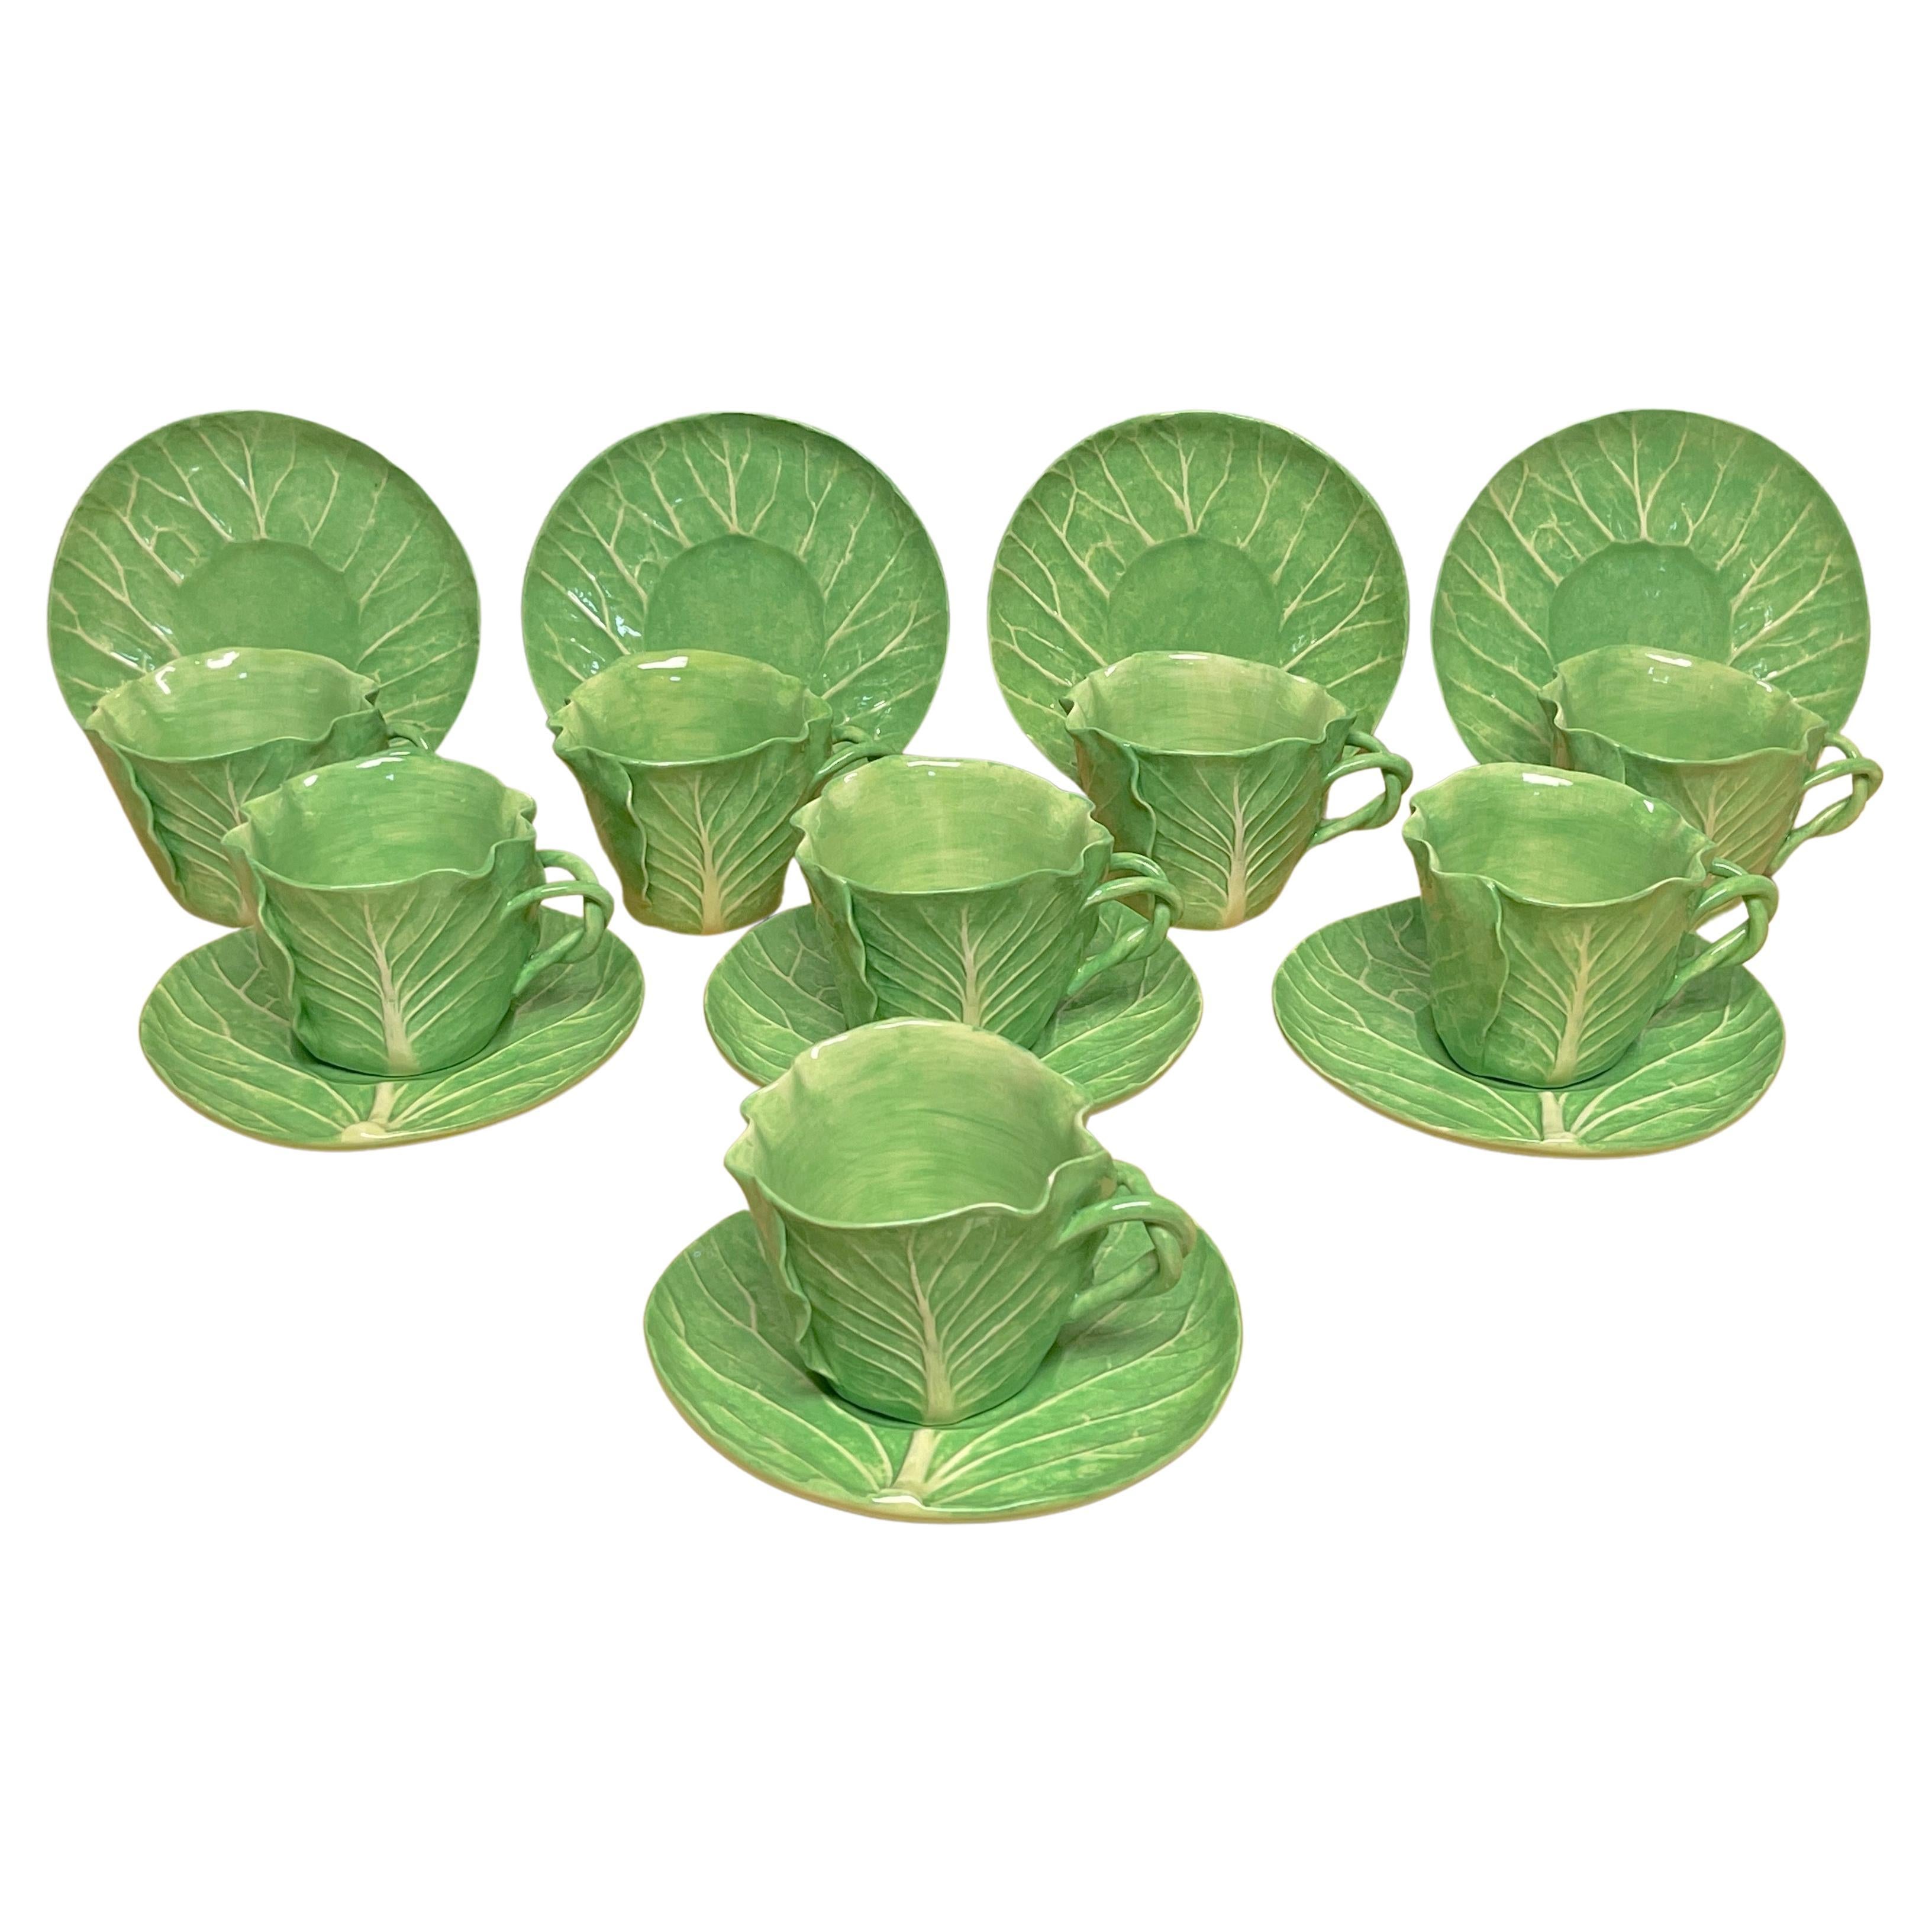 Dodie Thayer 'Jumbo' Lettuce Leaf Cup & Saucer, 5 Available, Sold Individually